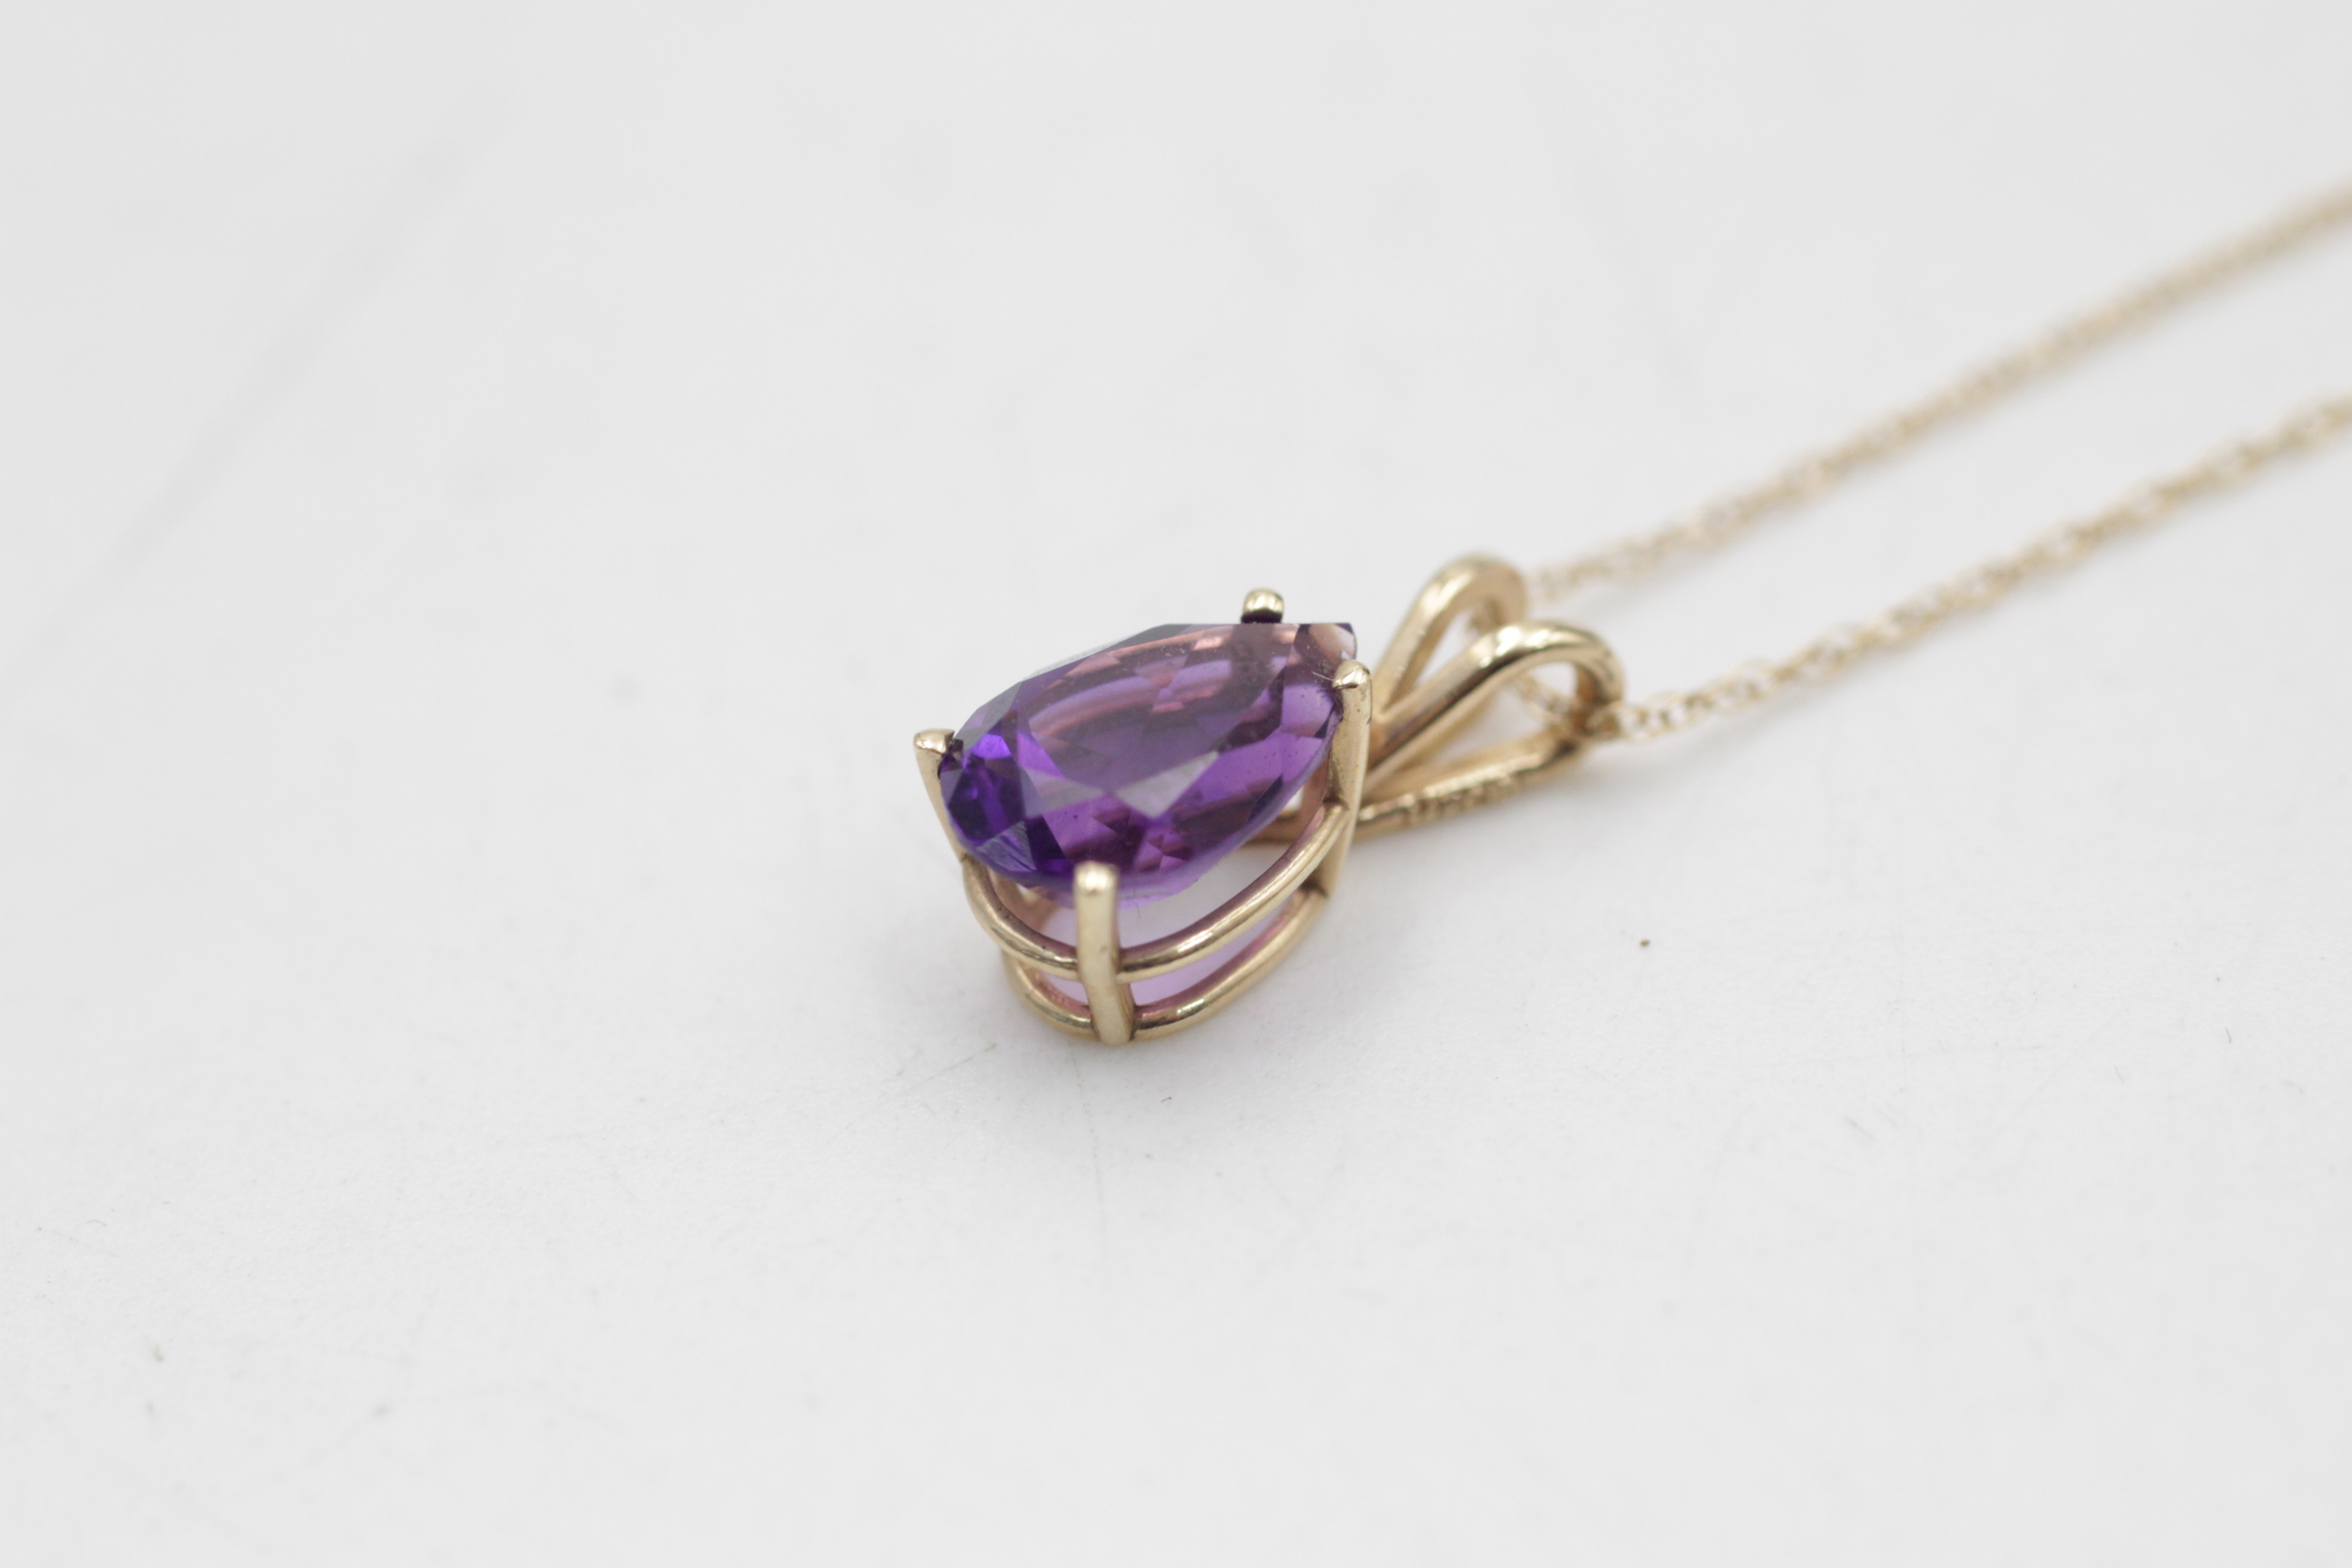 14ct gold amethyst solitaire pendant necklace (1.6g) - Image 3 of 6